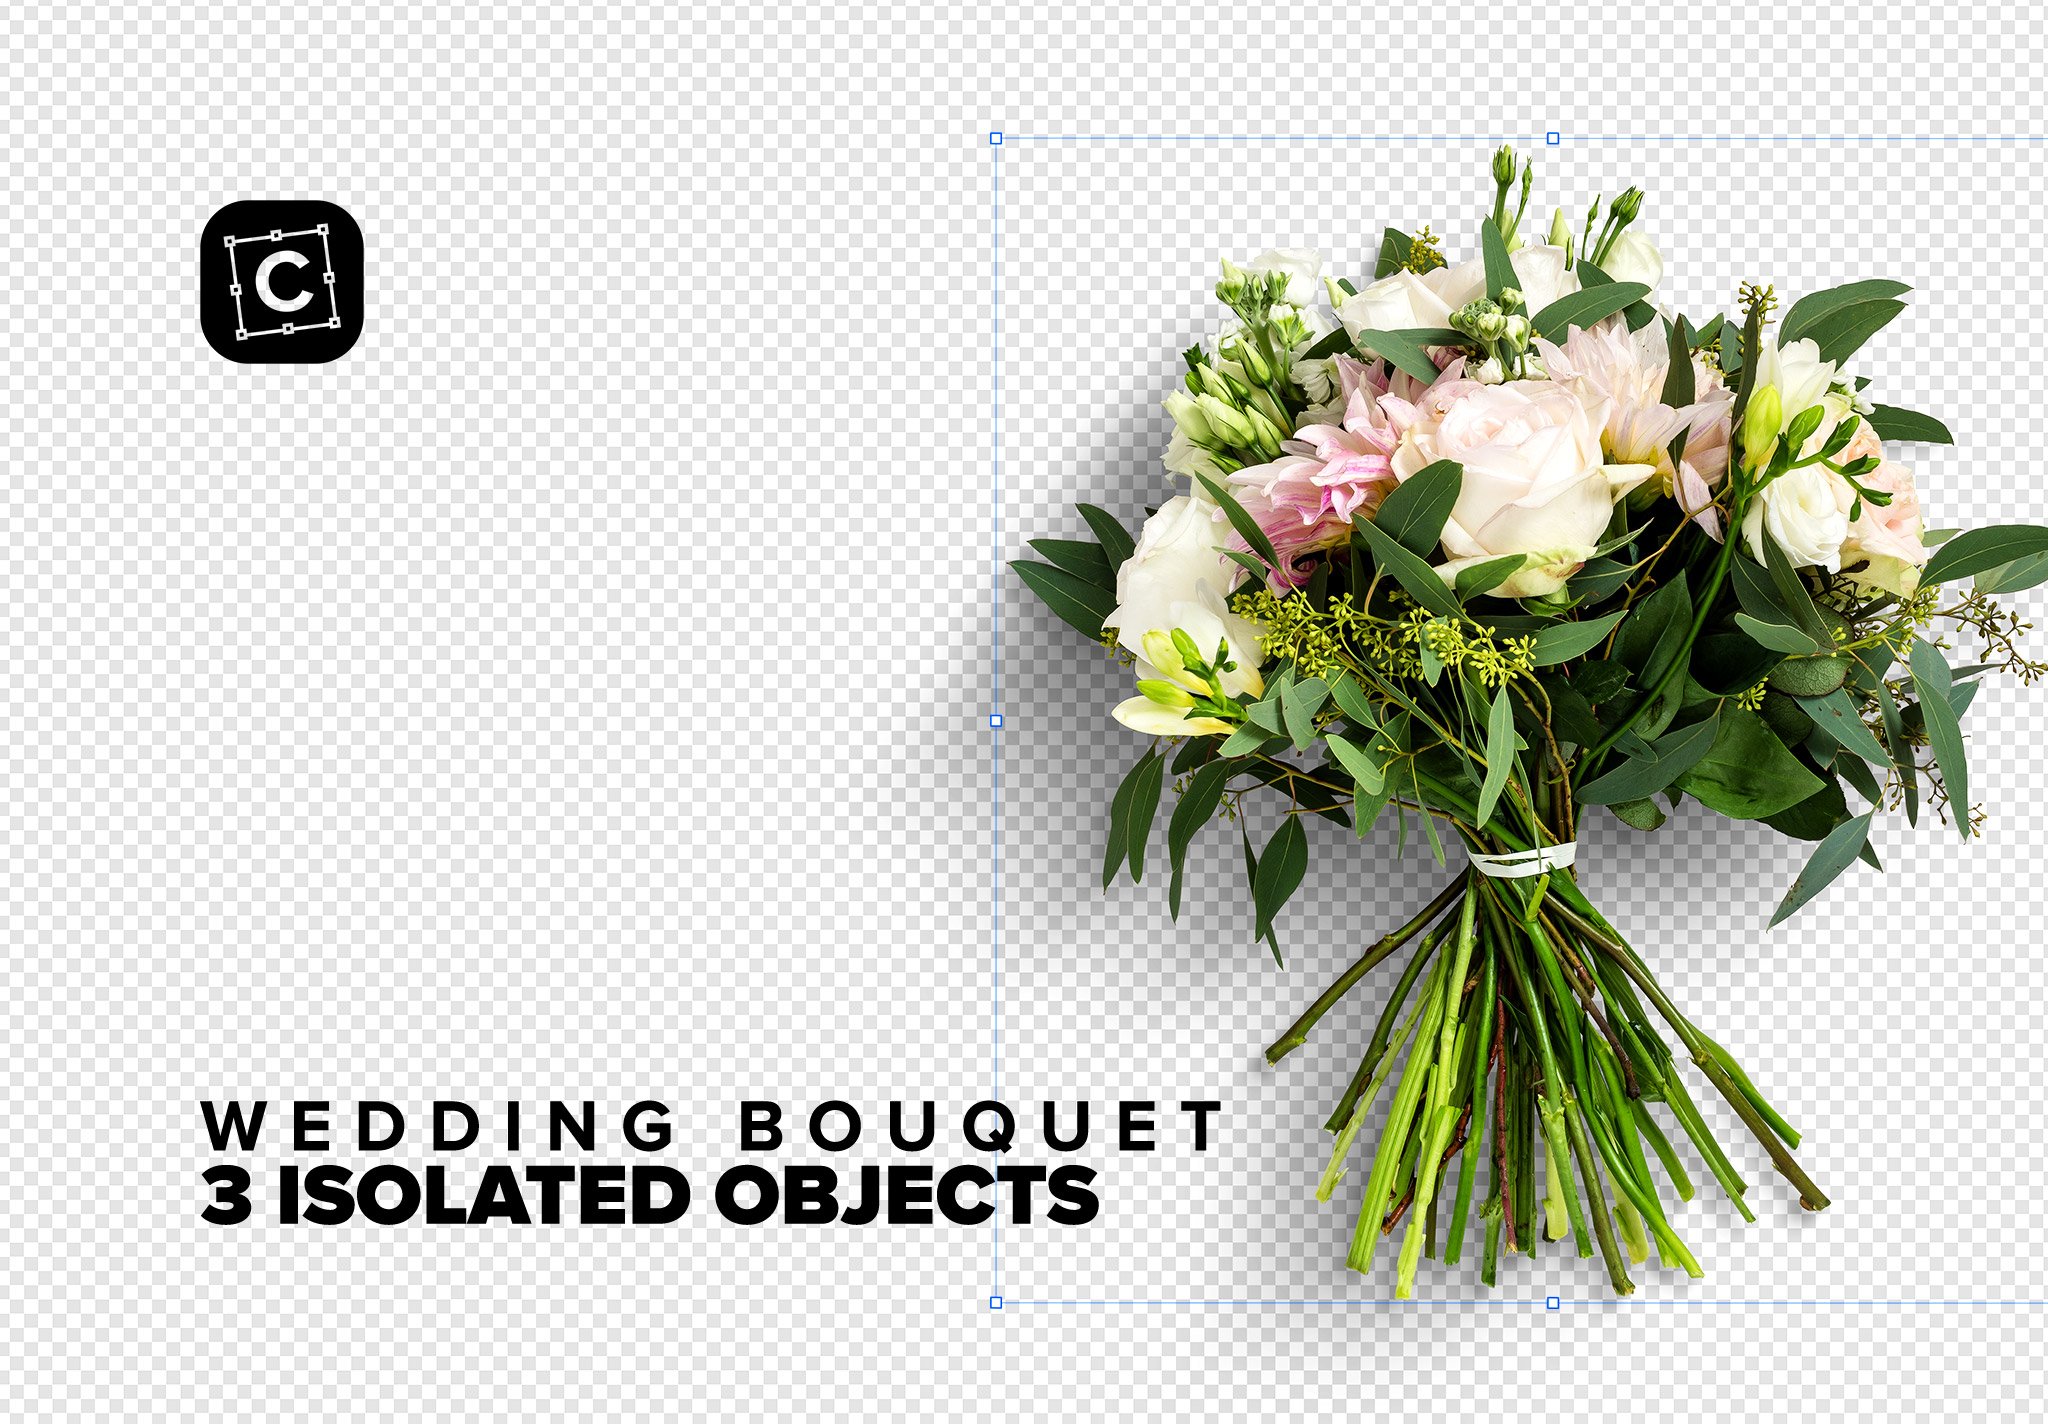 wedding bouquet flowers 03 isolated objects 117